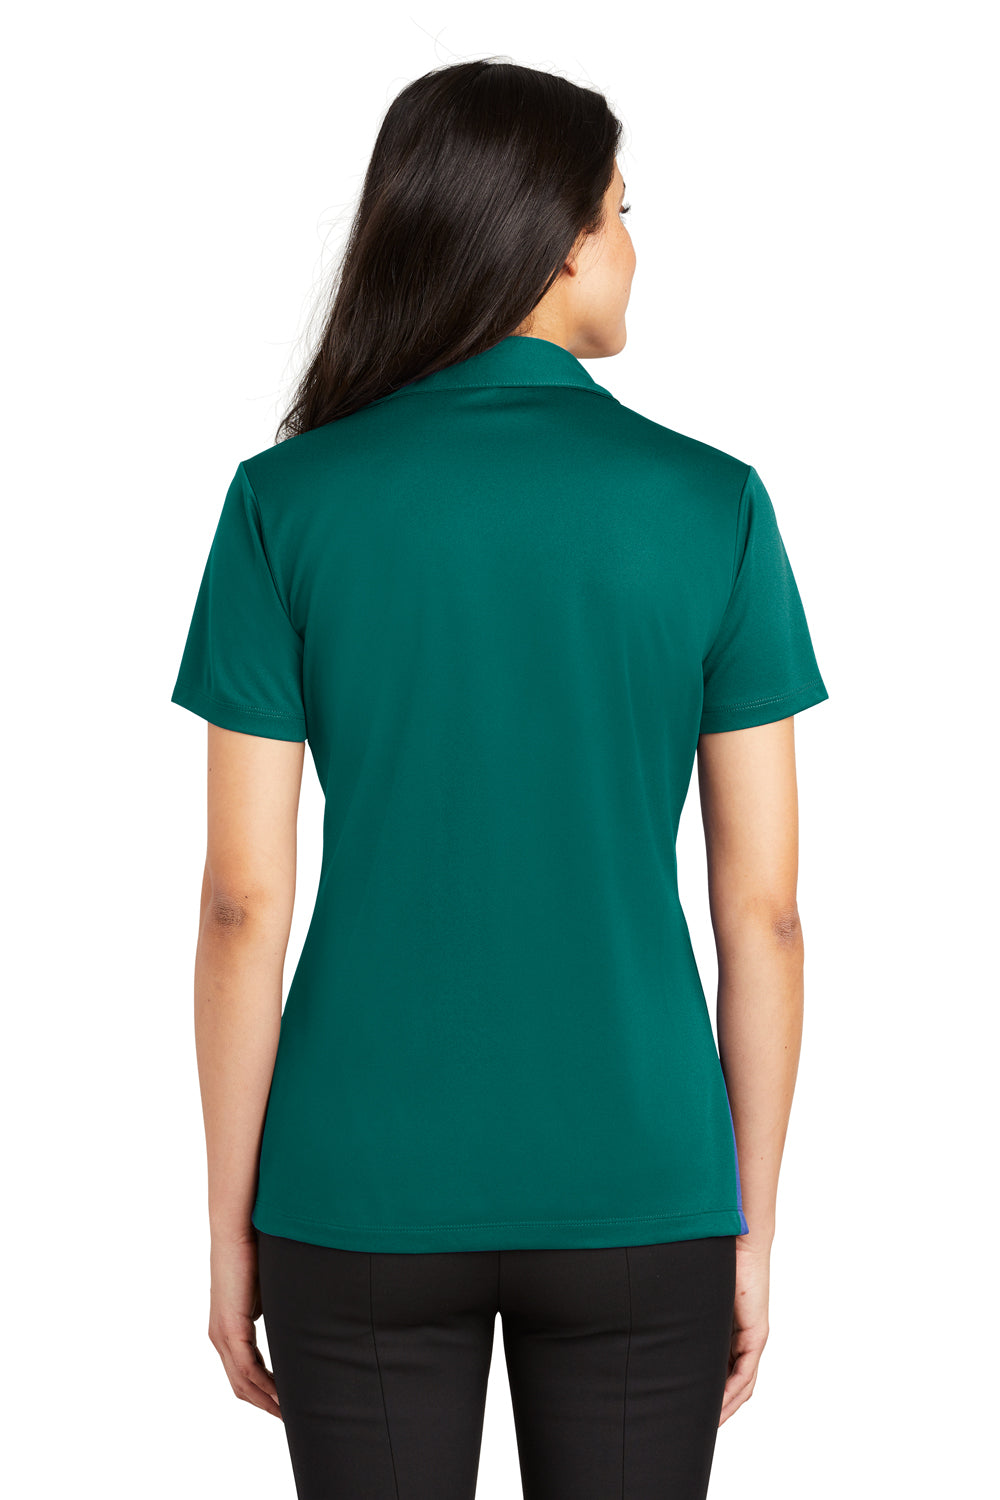 Port Authority L540 Womens Silk Touch Performance Moisture Wicking Short Sleeve Polo Shirt Teal Green Back